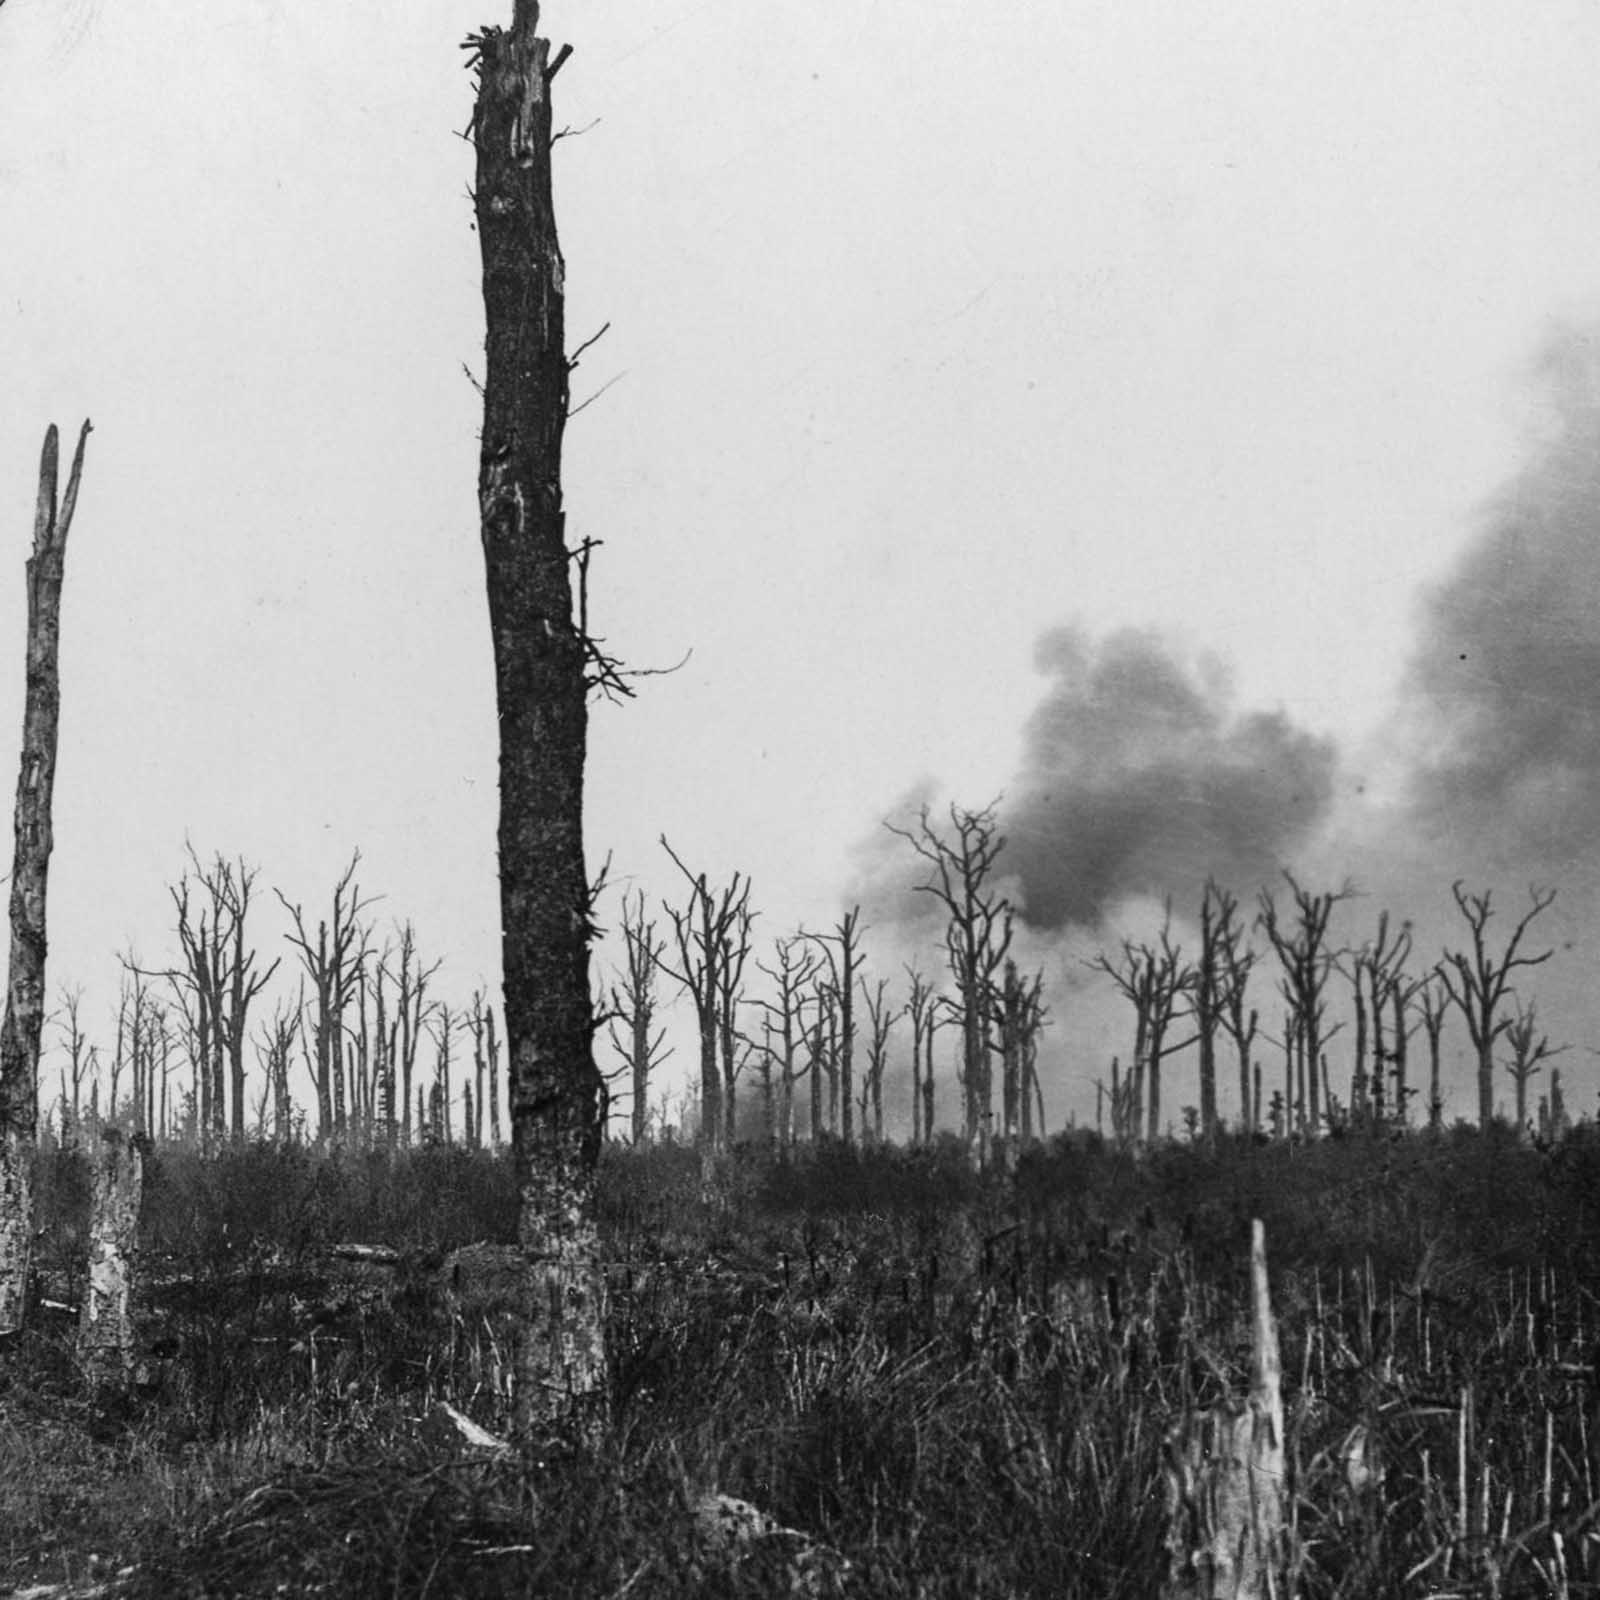 Mametz Wood was the objective of the 38th (Welsh) Division at the Battle of the Somme. The division took 4,000 casualties capturing the wood.